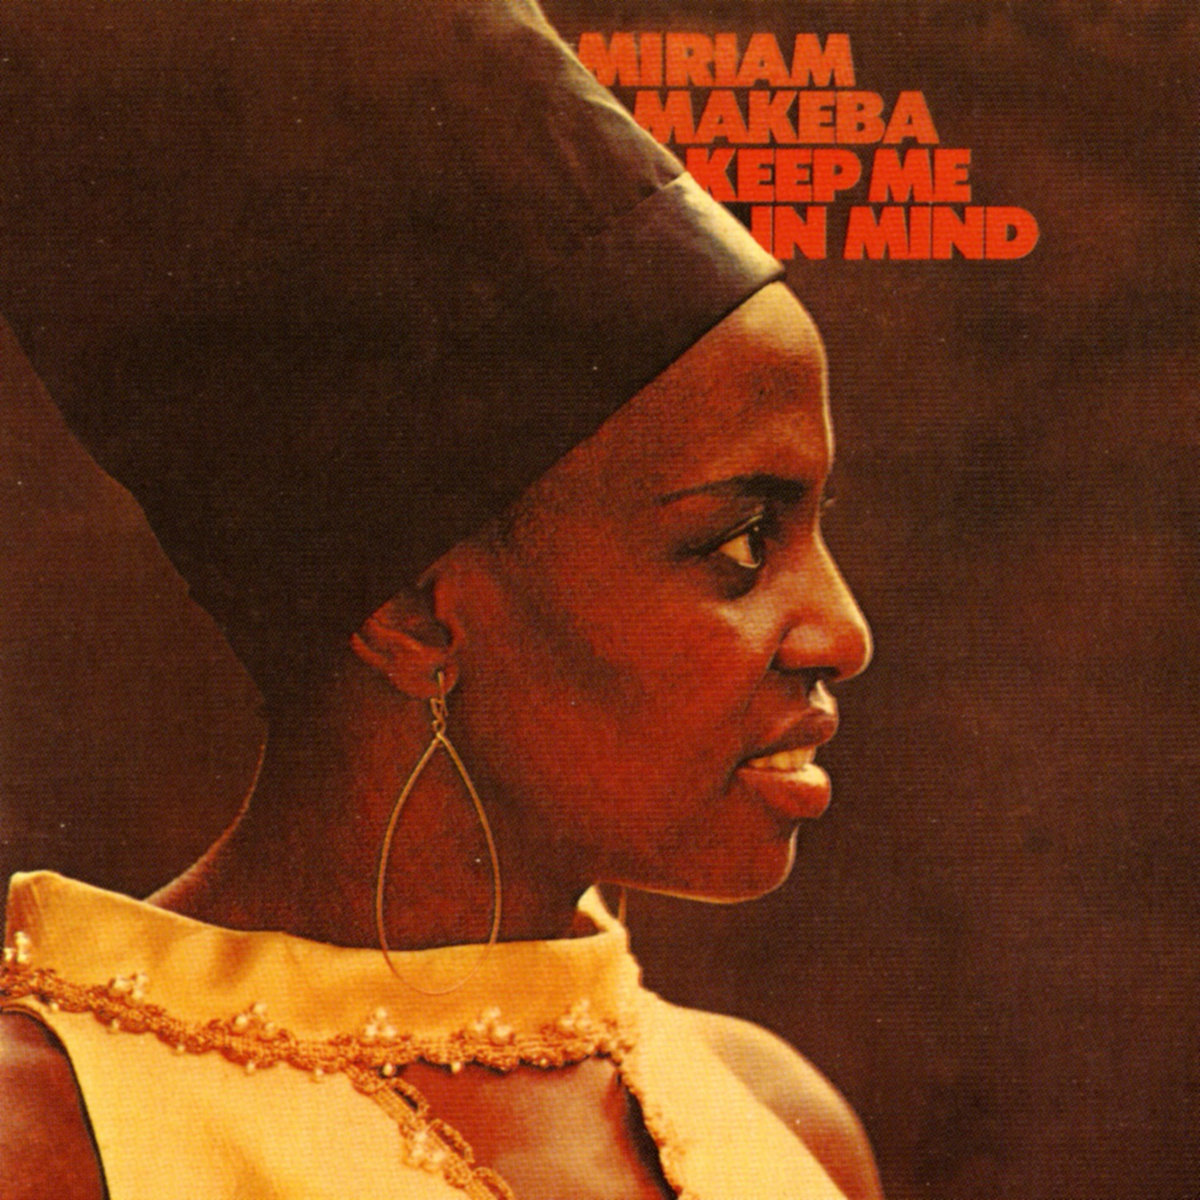 Miriam Makeba – Keep Me In Mind (remastered) OUT NOW